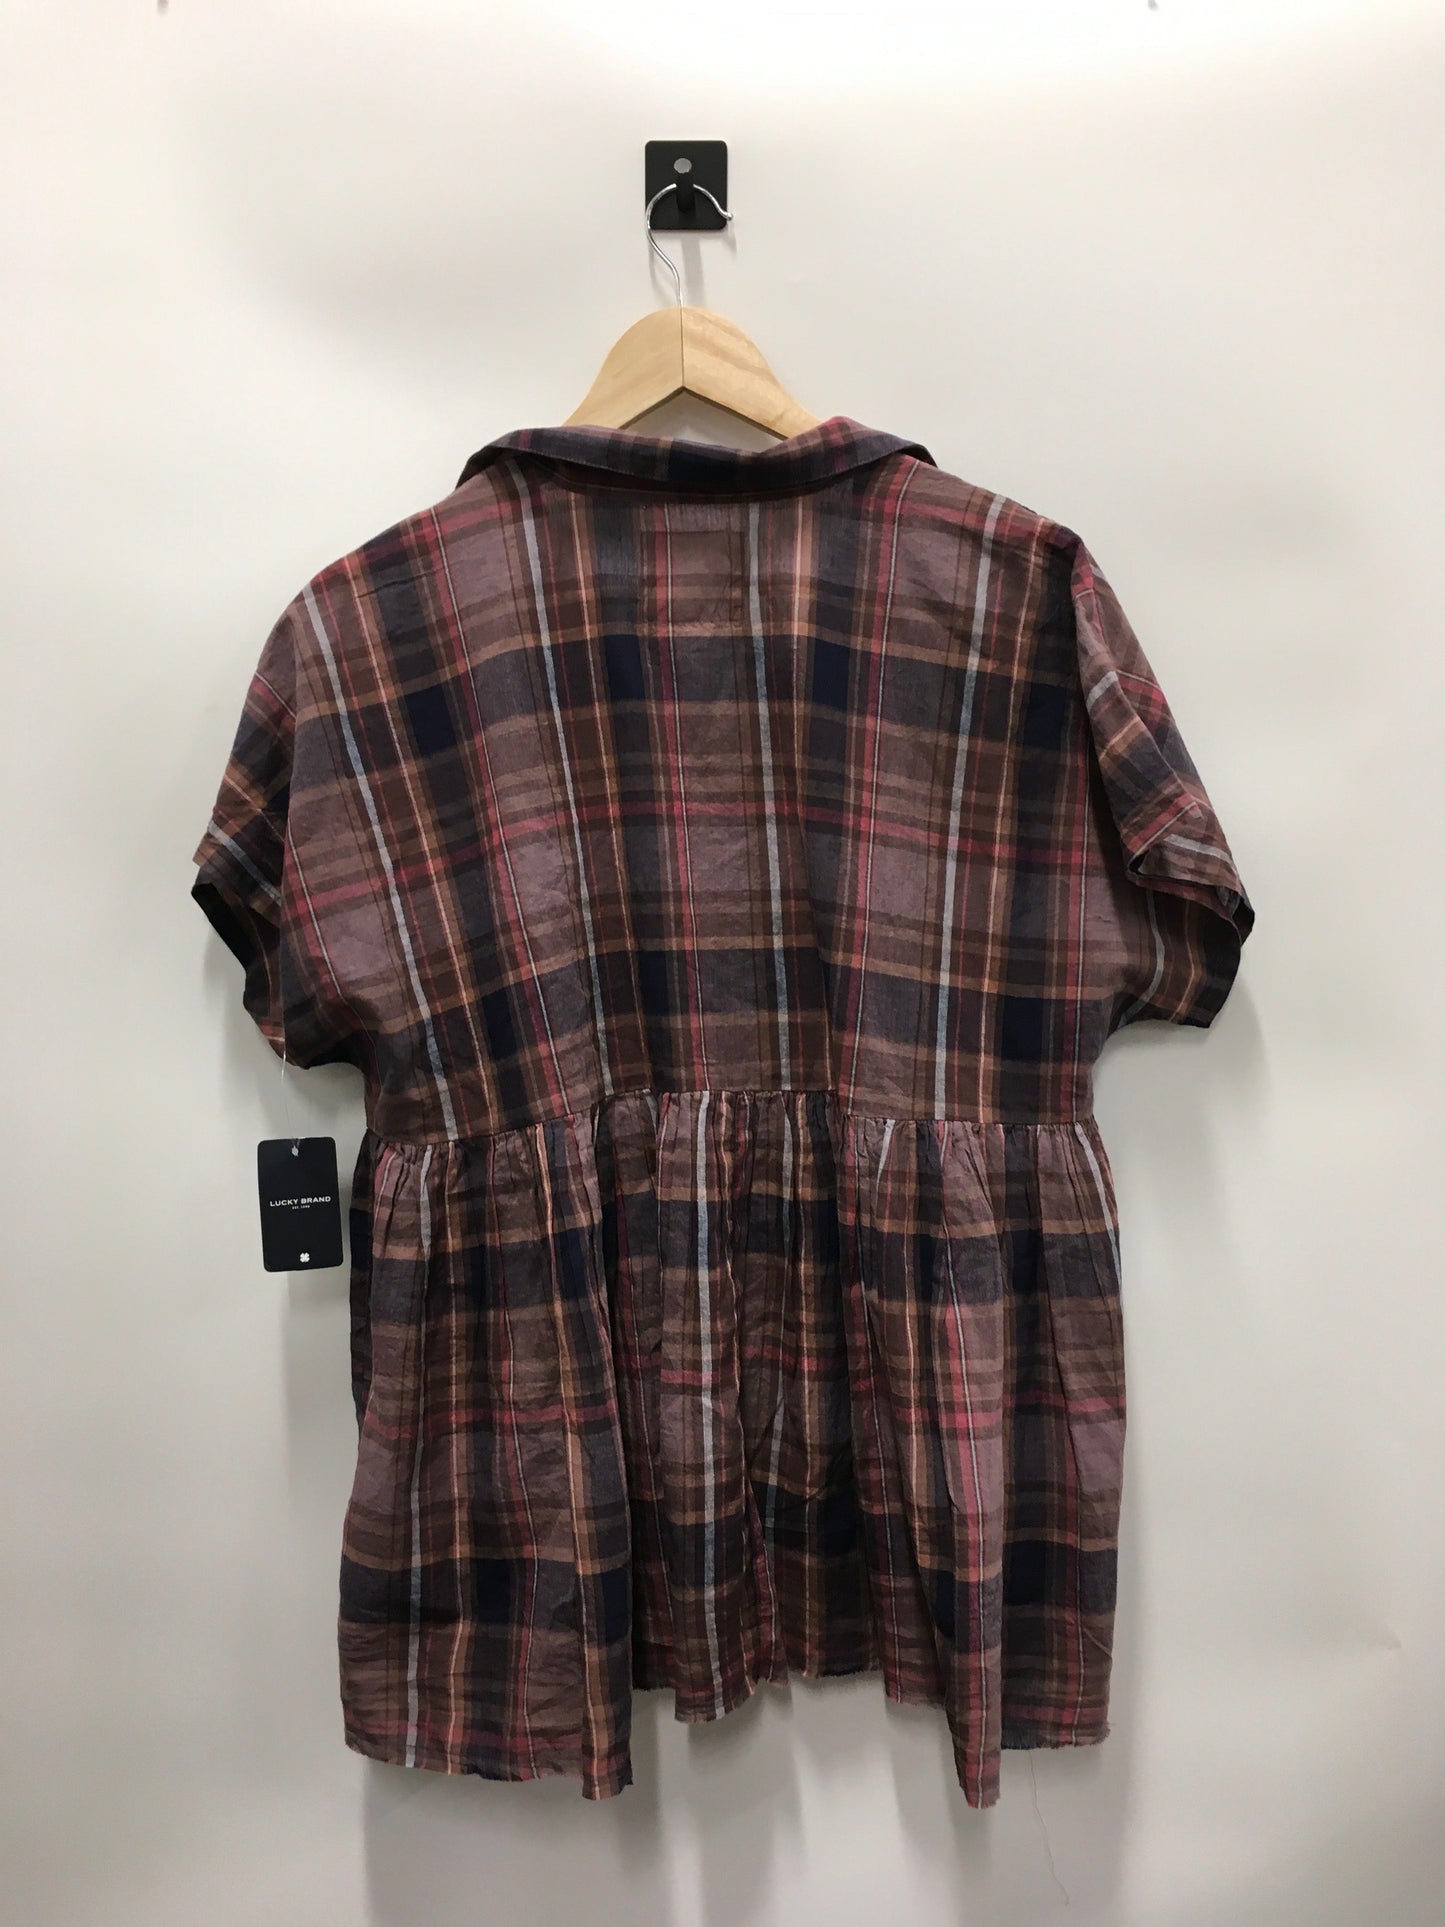 Plaid Pattern Top Short Sleeve Lucky Brand, Size M